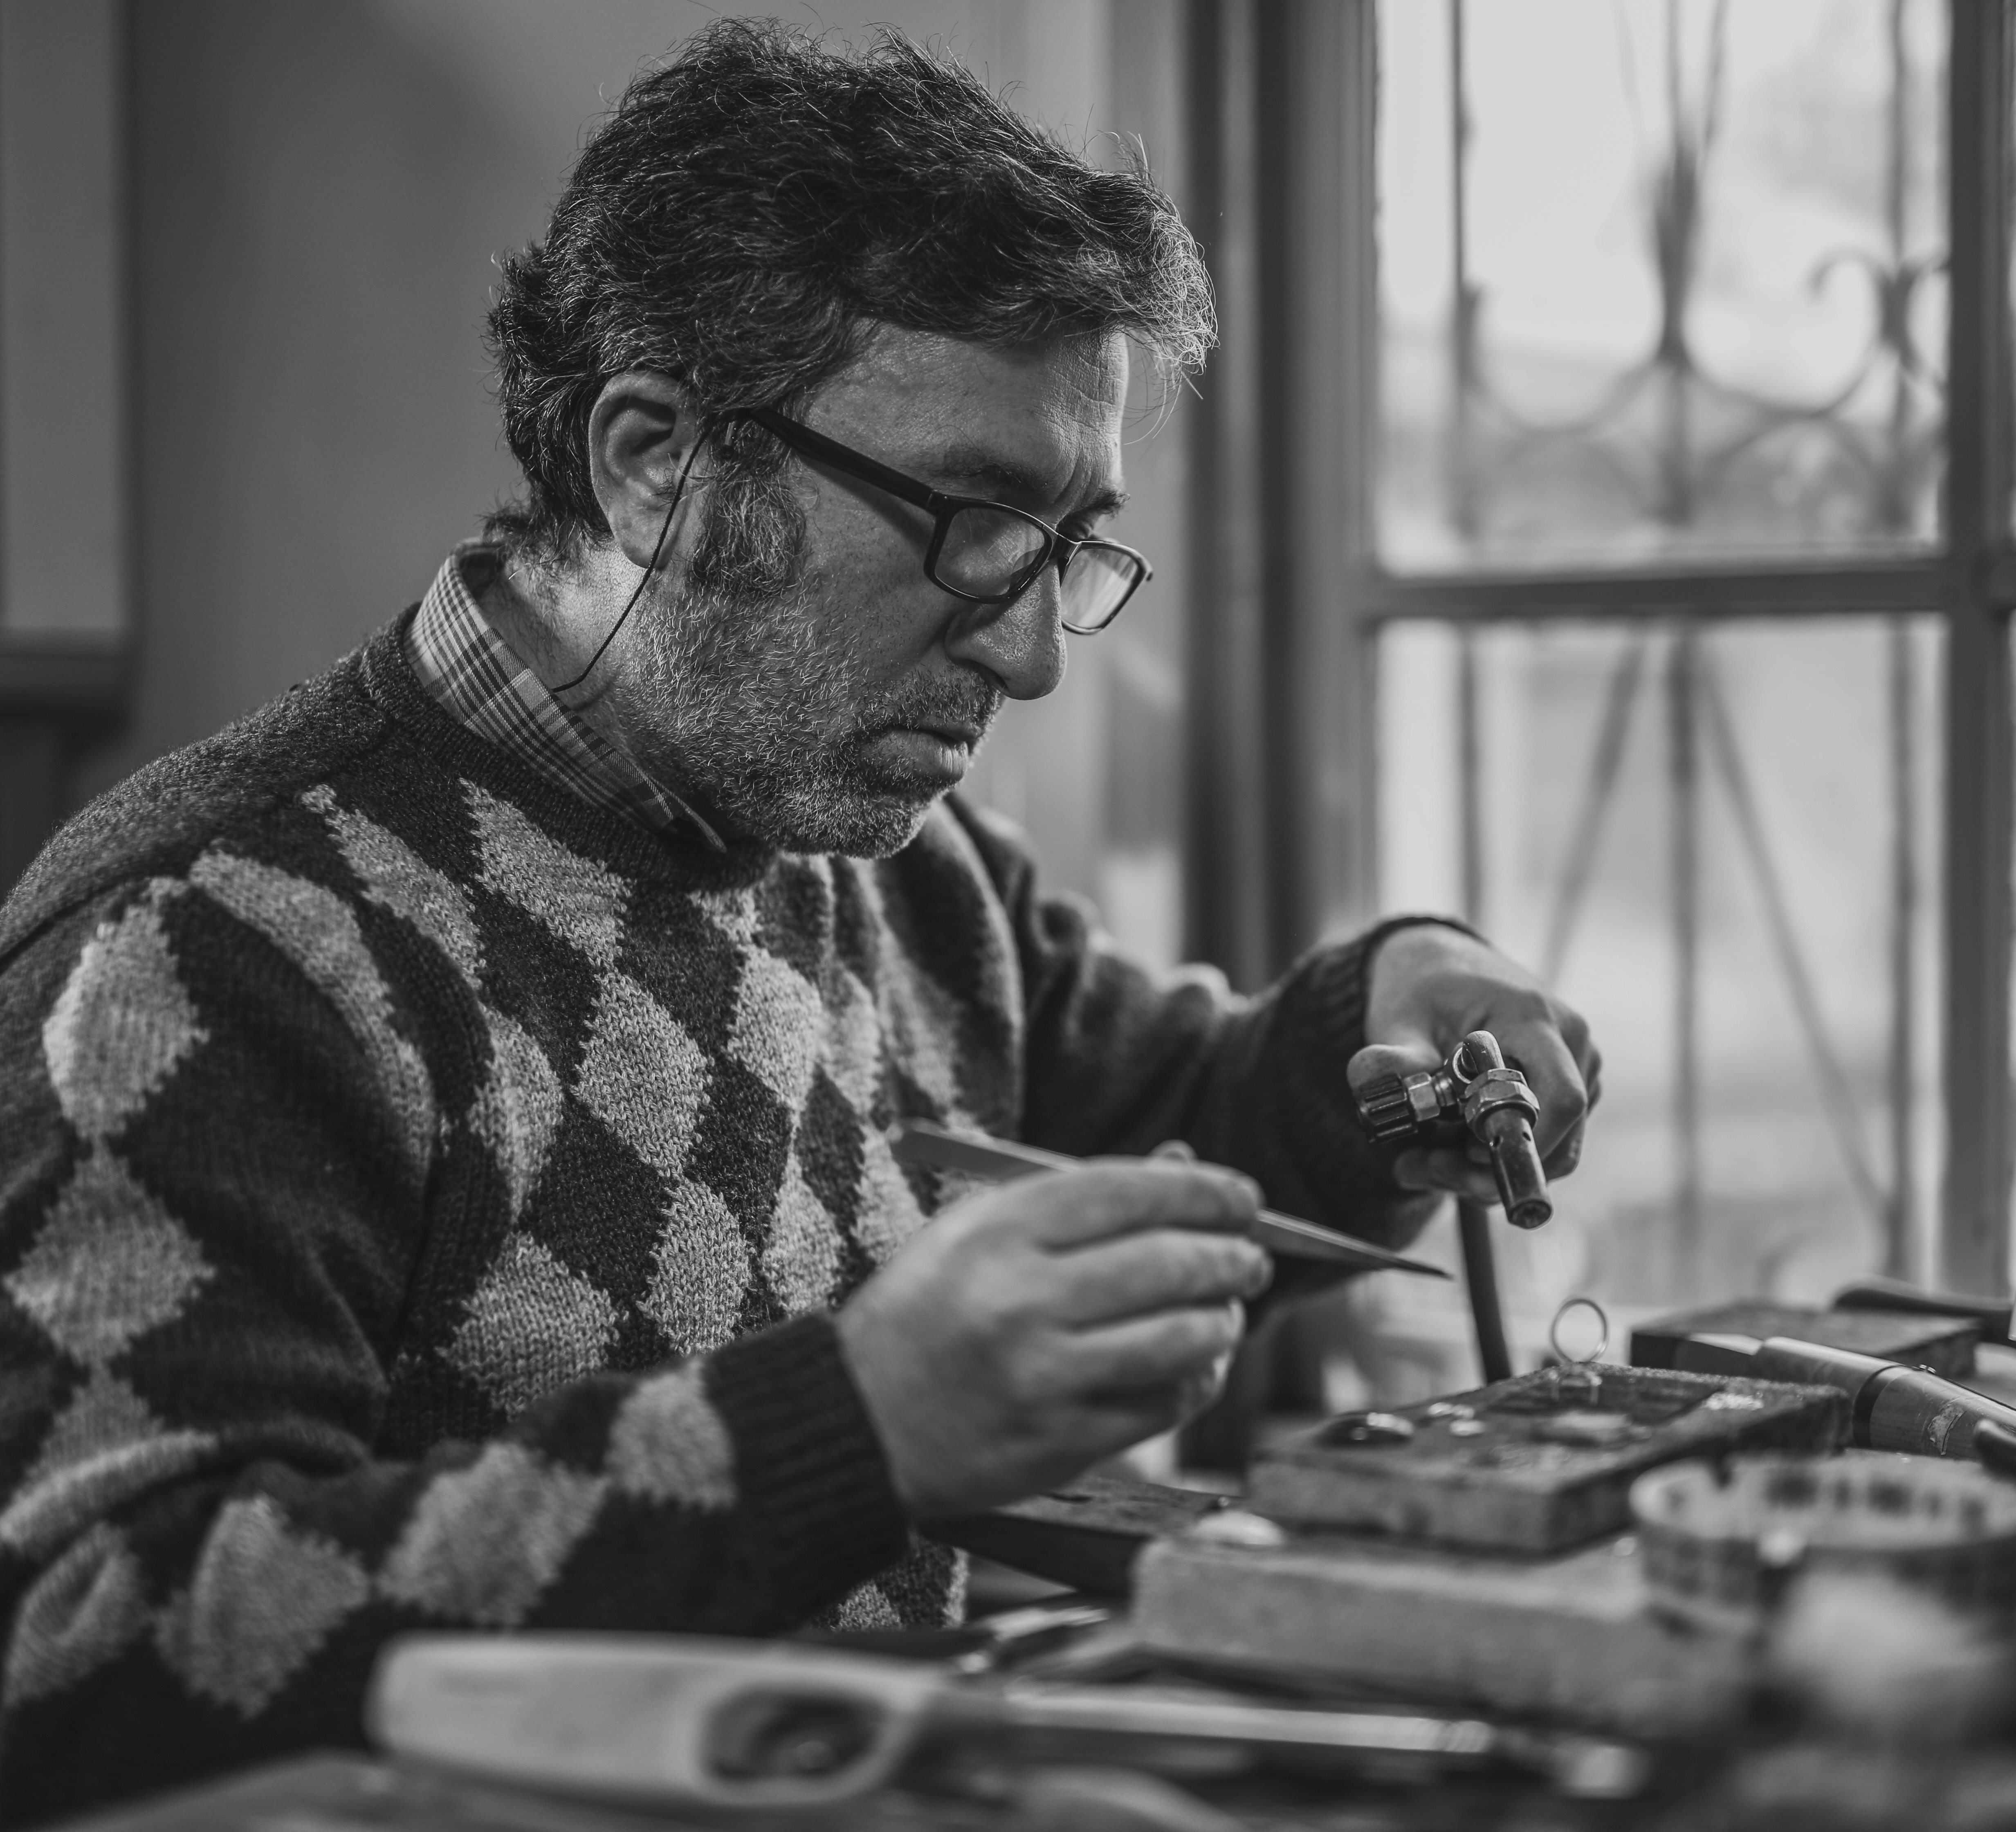 Old Man with glasses crafting equipment